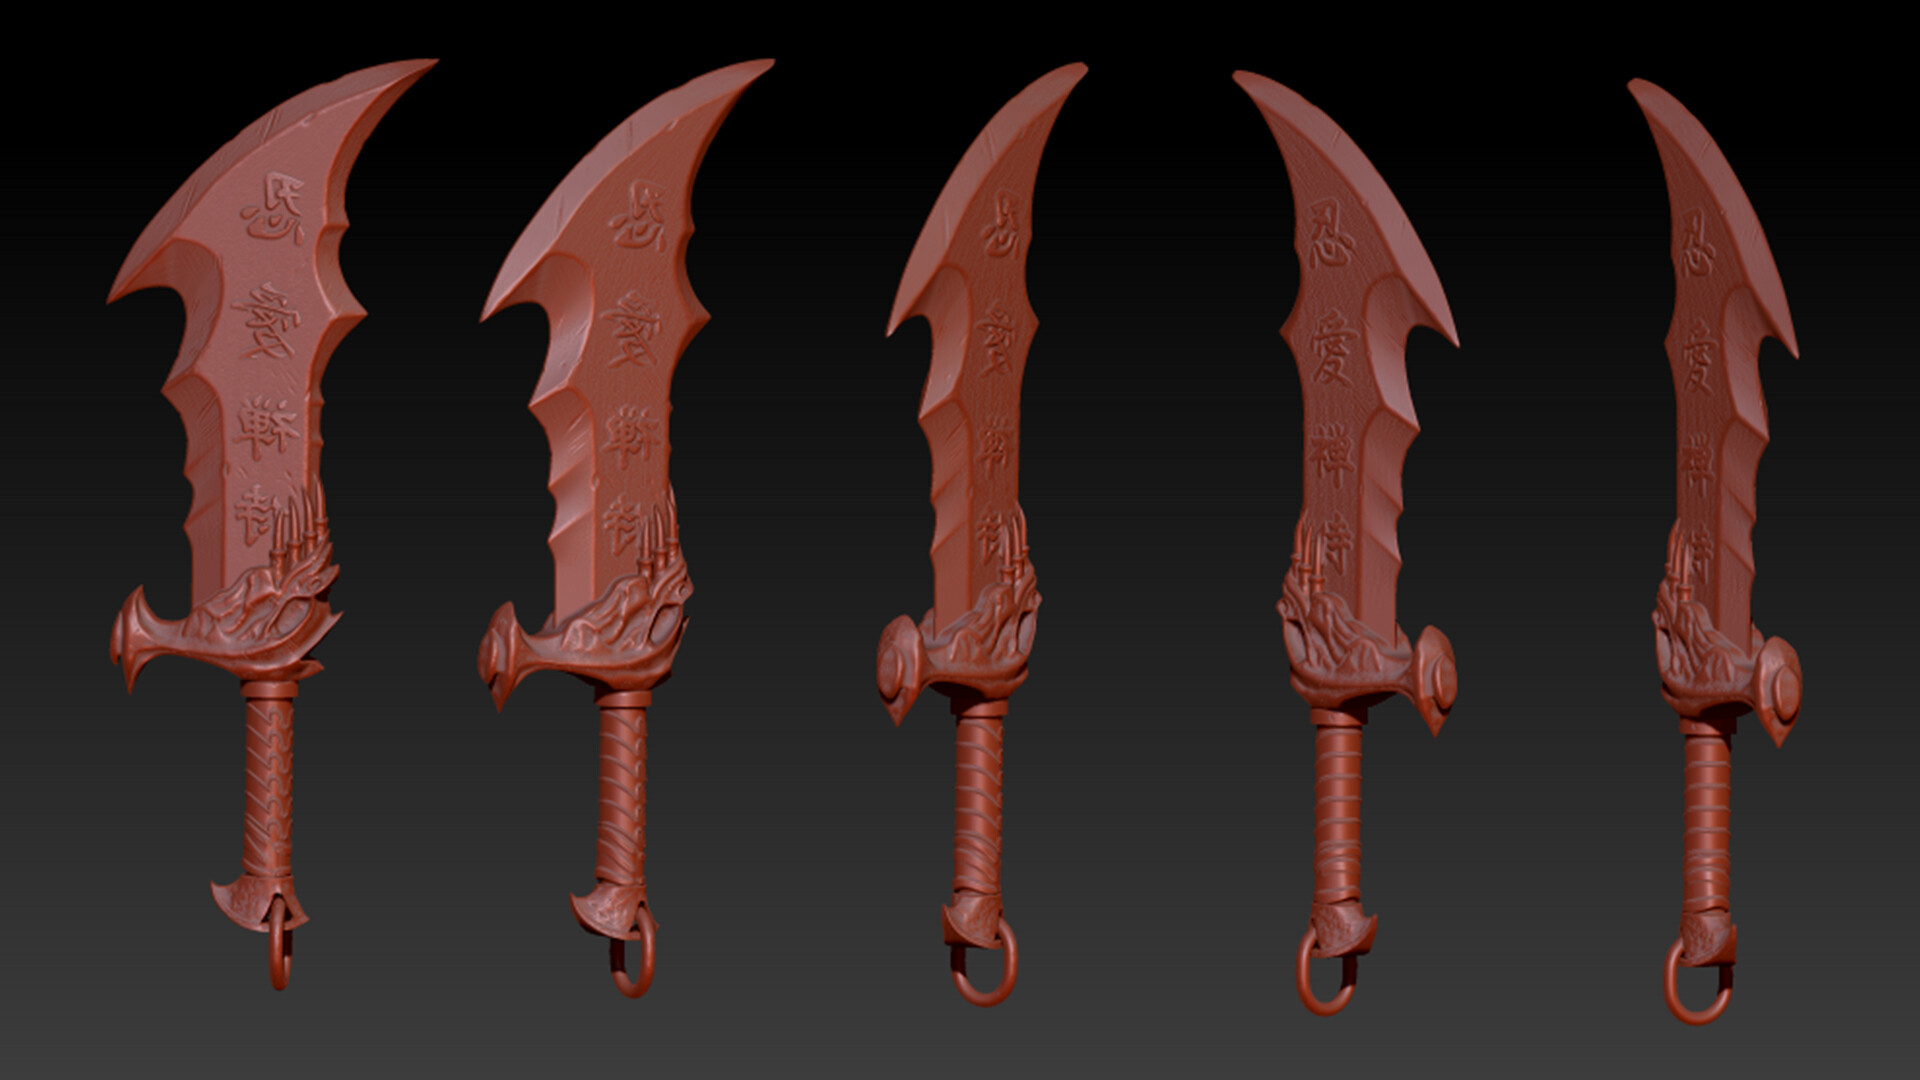 ArtStation - blade of olympus from god of war 2 modeling and hand